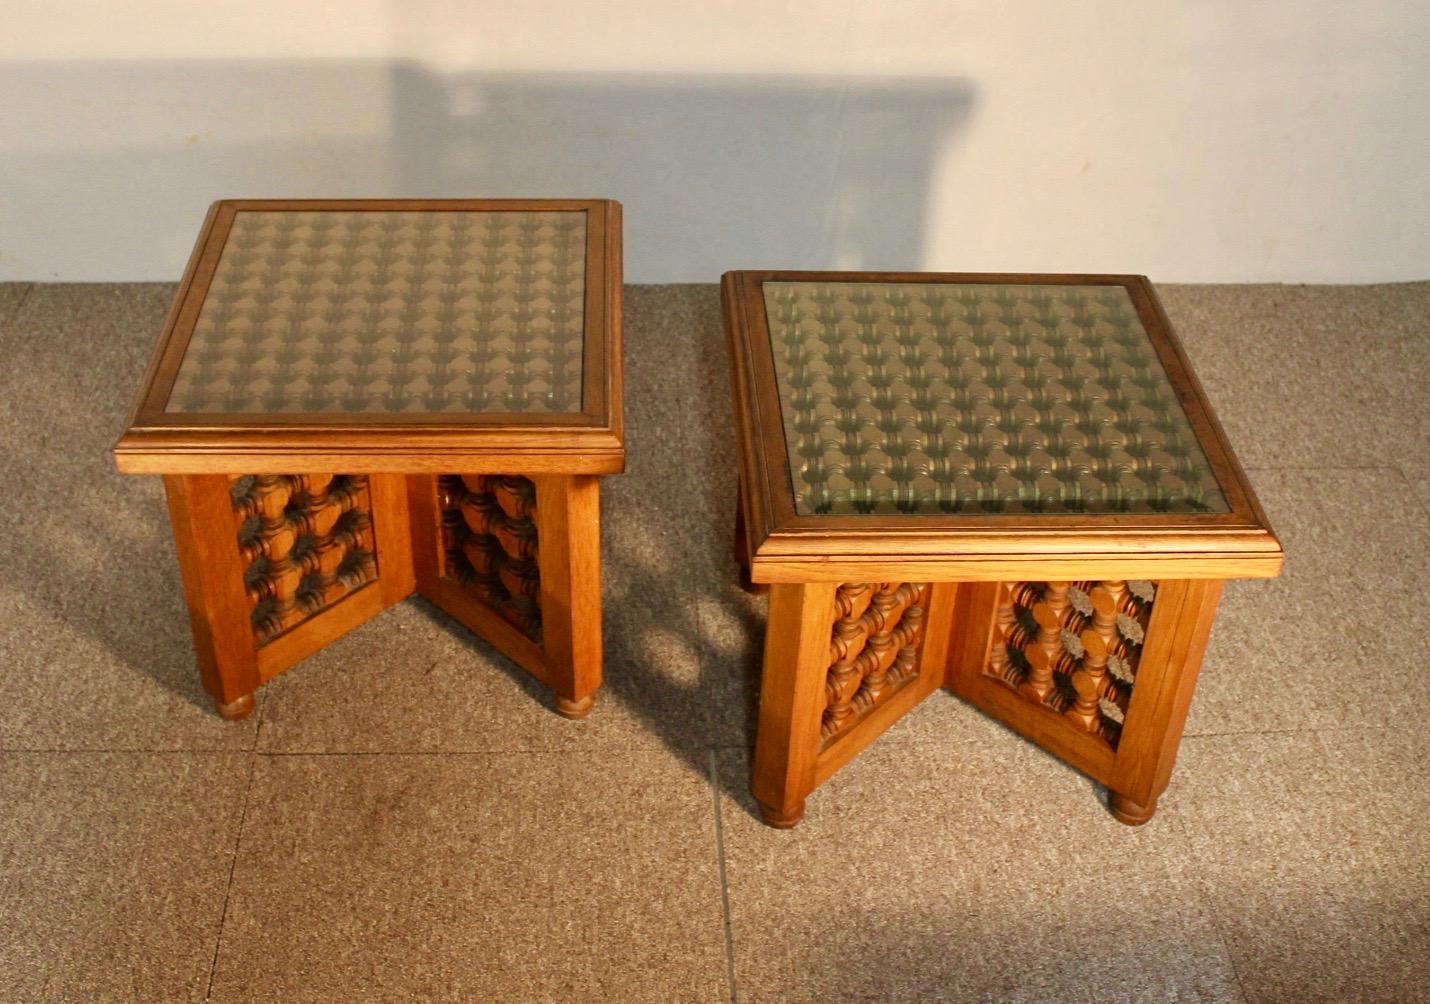 Pair of tables, rabié fly, wood, bevelled glass top. Side tables, bedside tables that are out of the ordinary.
Very charming.
Work from the 70s, Moroccan during colonization.